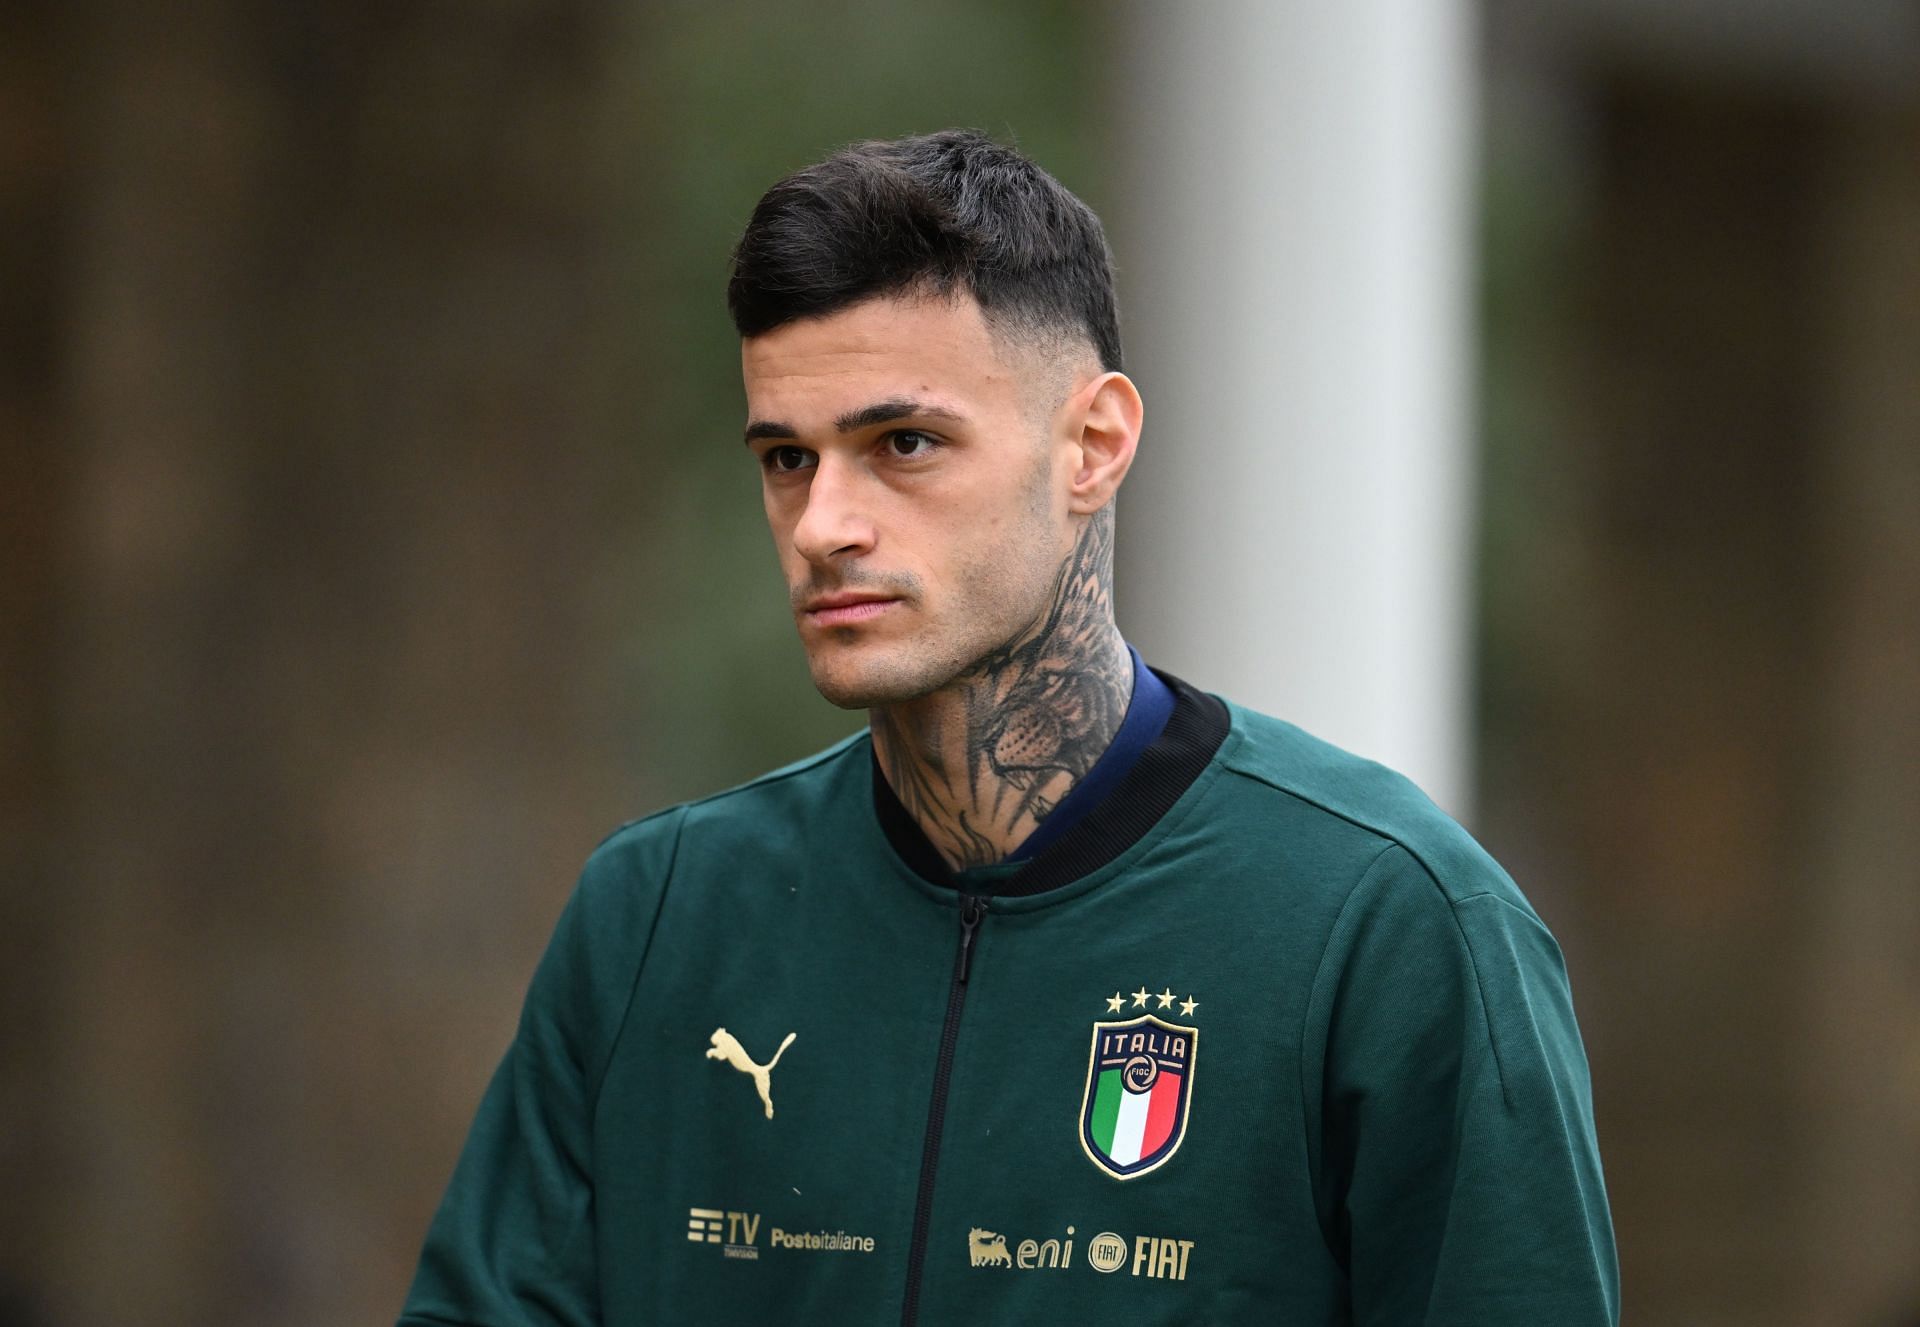 Gianluca Scamacca looks a bright prospect for the future